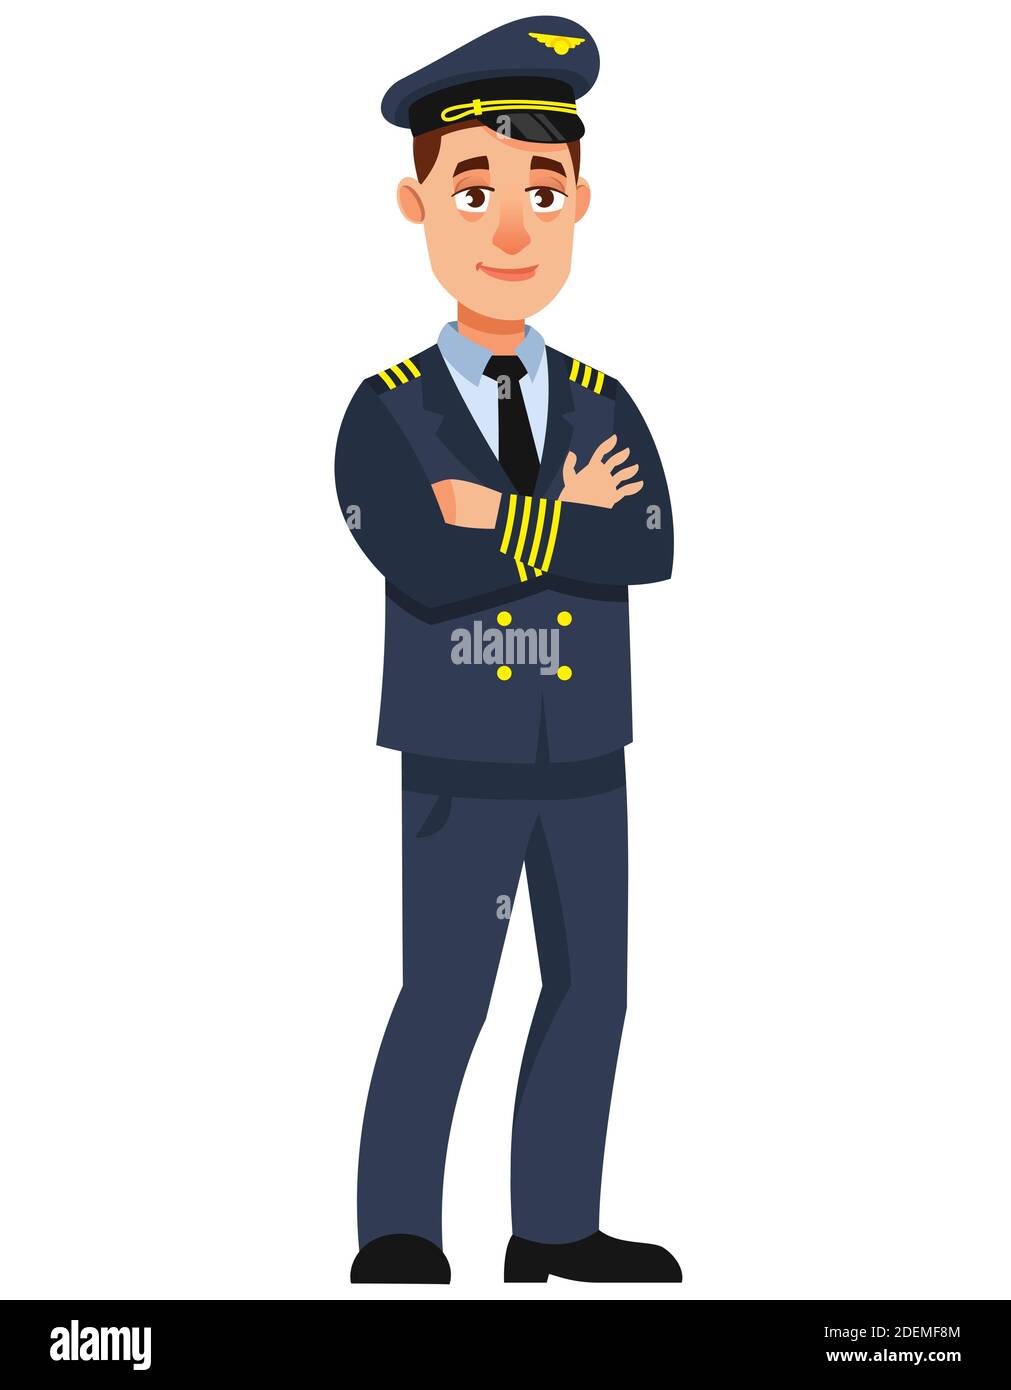 Airplane pilot with his arms crossed. Male character in cartoon style. Stock Vector